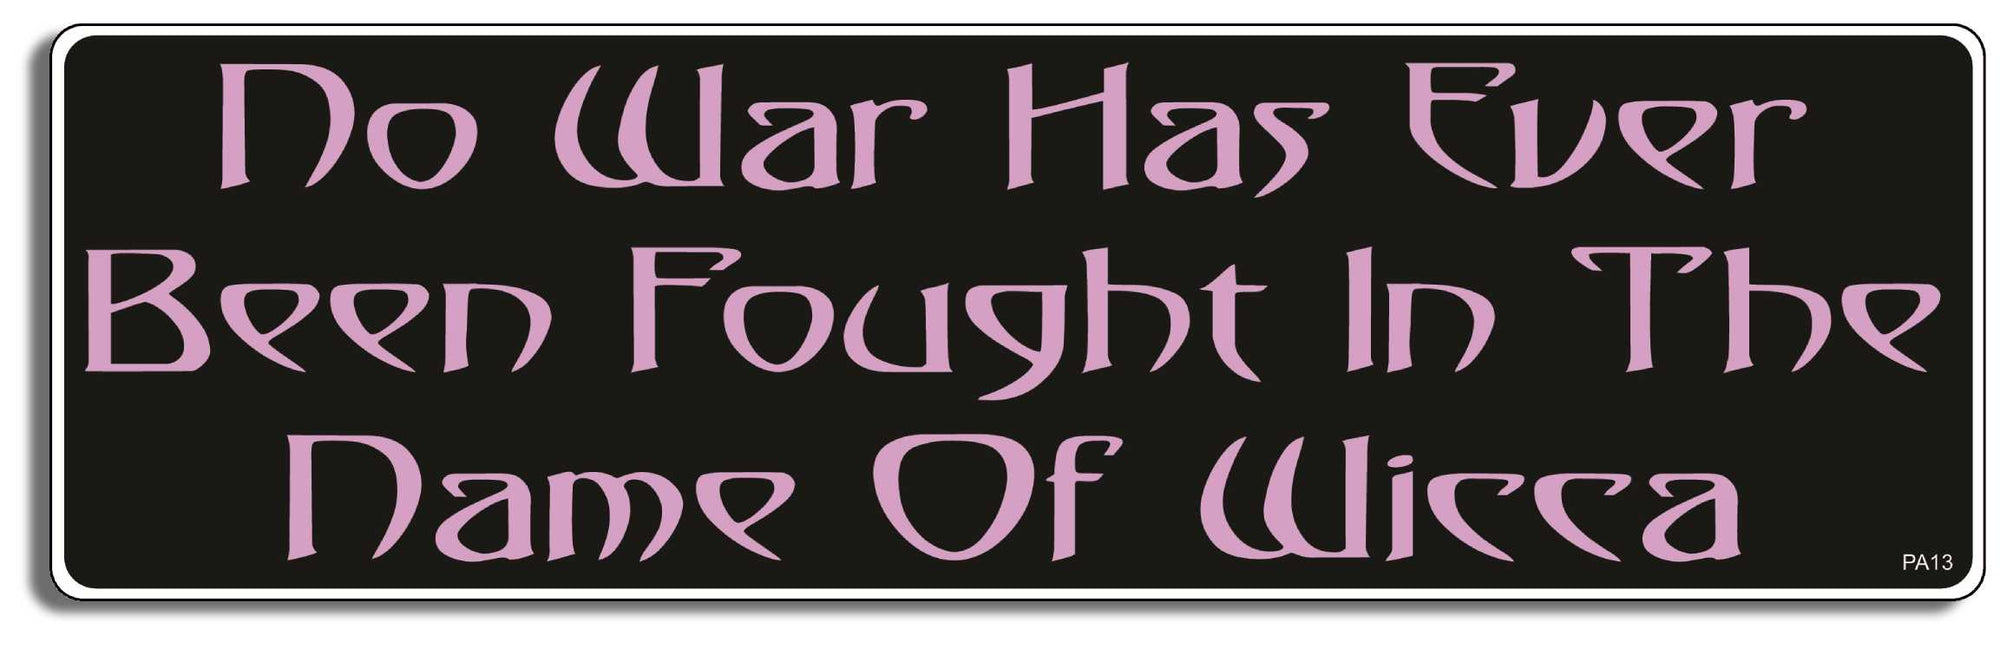 No war has ever been fought in the name of Wicca - 3" x 10" Bumper Sticker--Car Magnet- -  Decal Bumper Sticker-pagan Bumper Sticker Car Magnet No war has ever been fought in the-  Decal for carsatheist, pagan, wiccan, witch